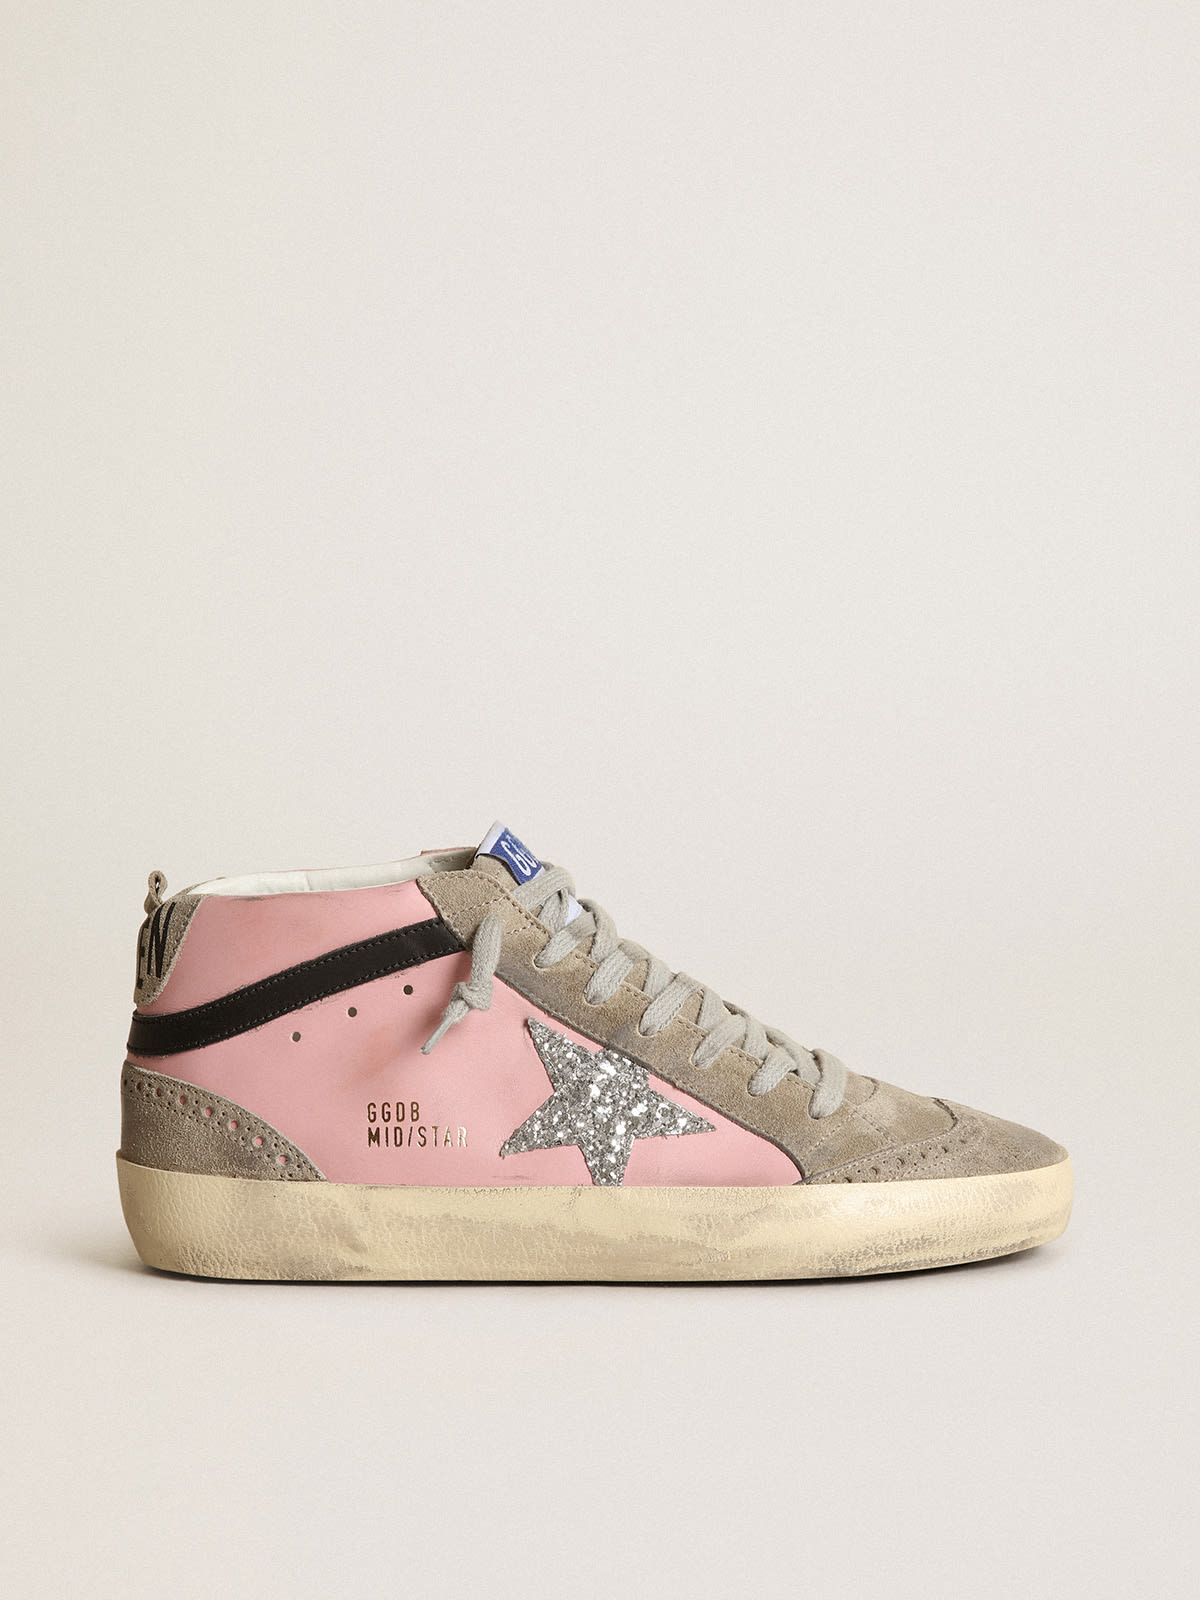 Mid Star LTD sneakers in pink leather with silver glitter star and 